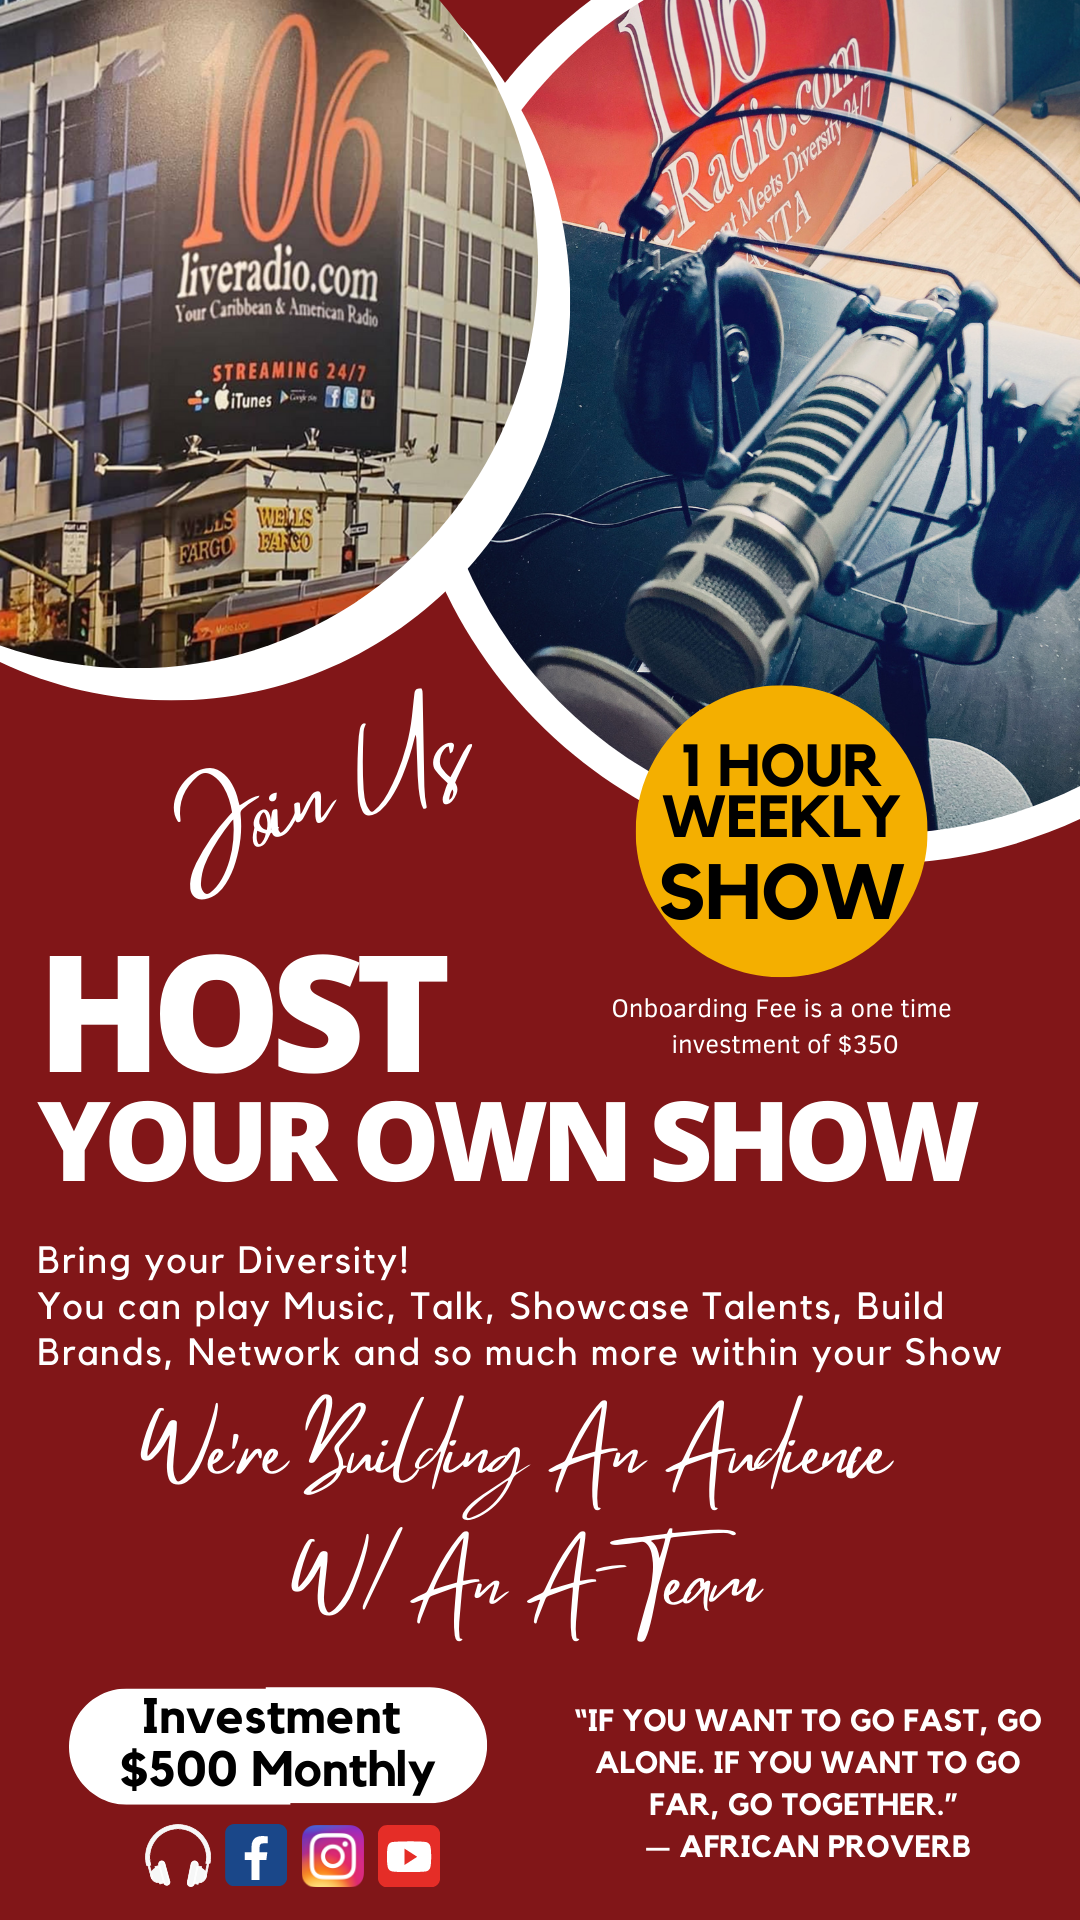 Host your own show